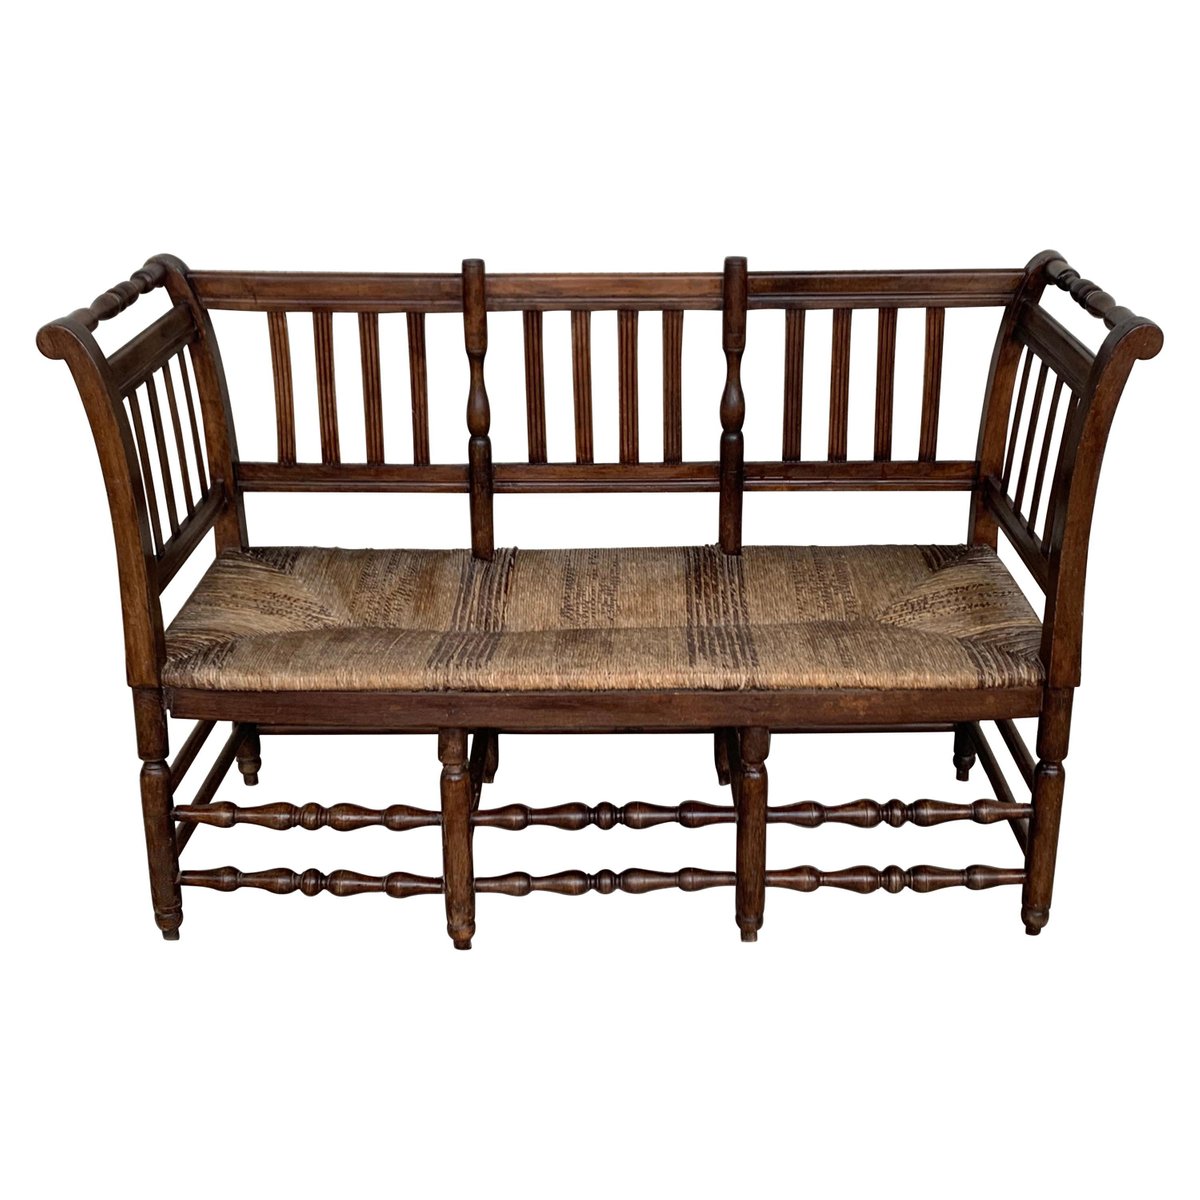 20th century catalan bench in walnut with caned seat PSK-1002596